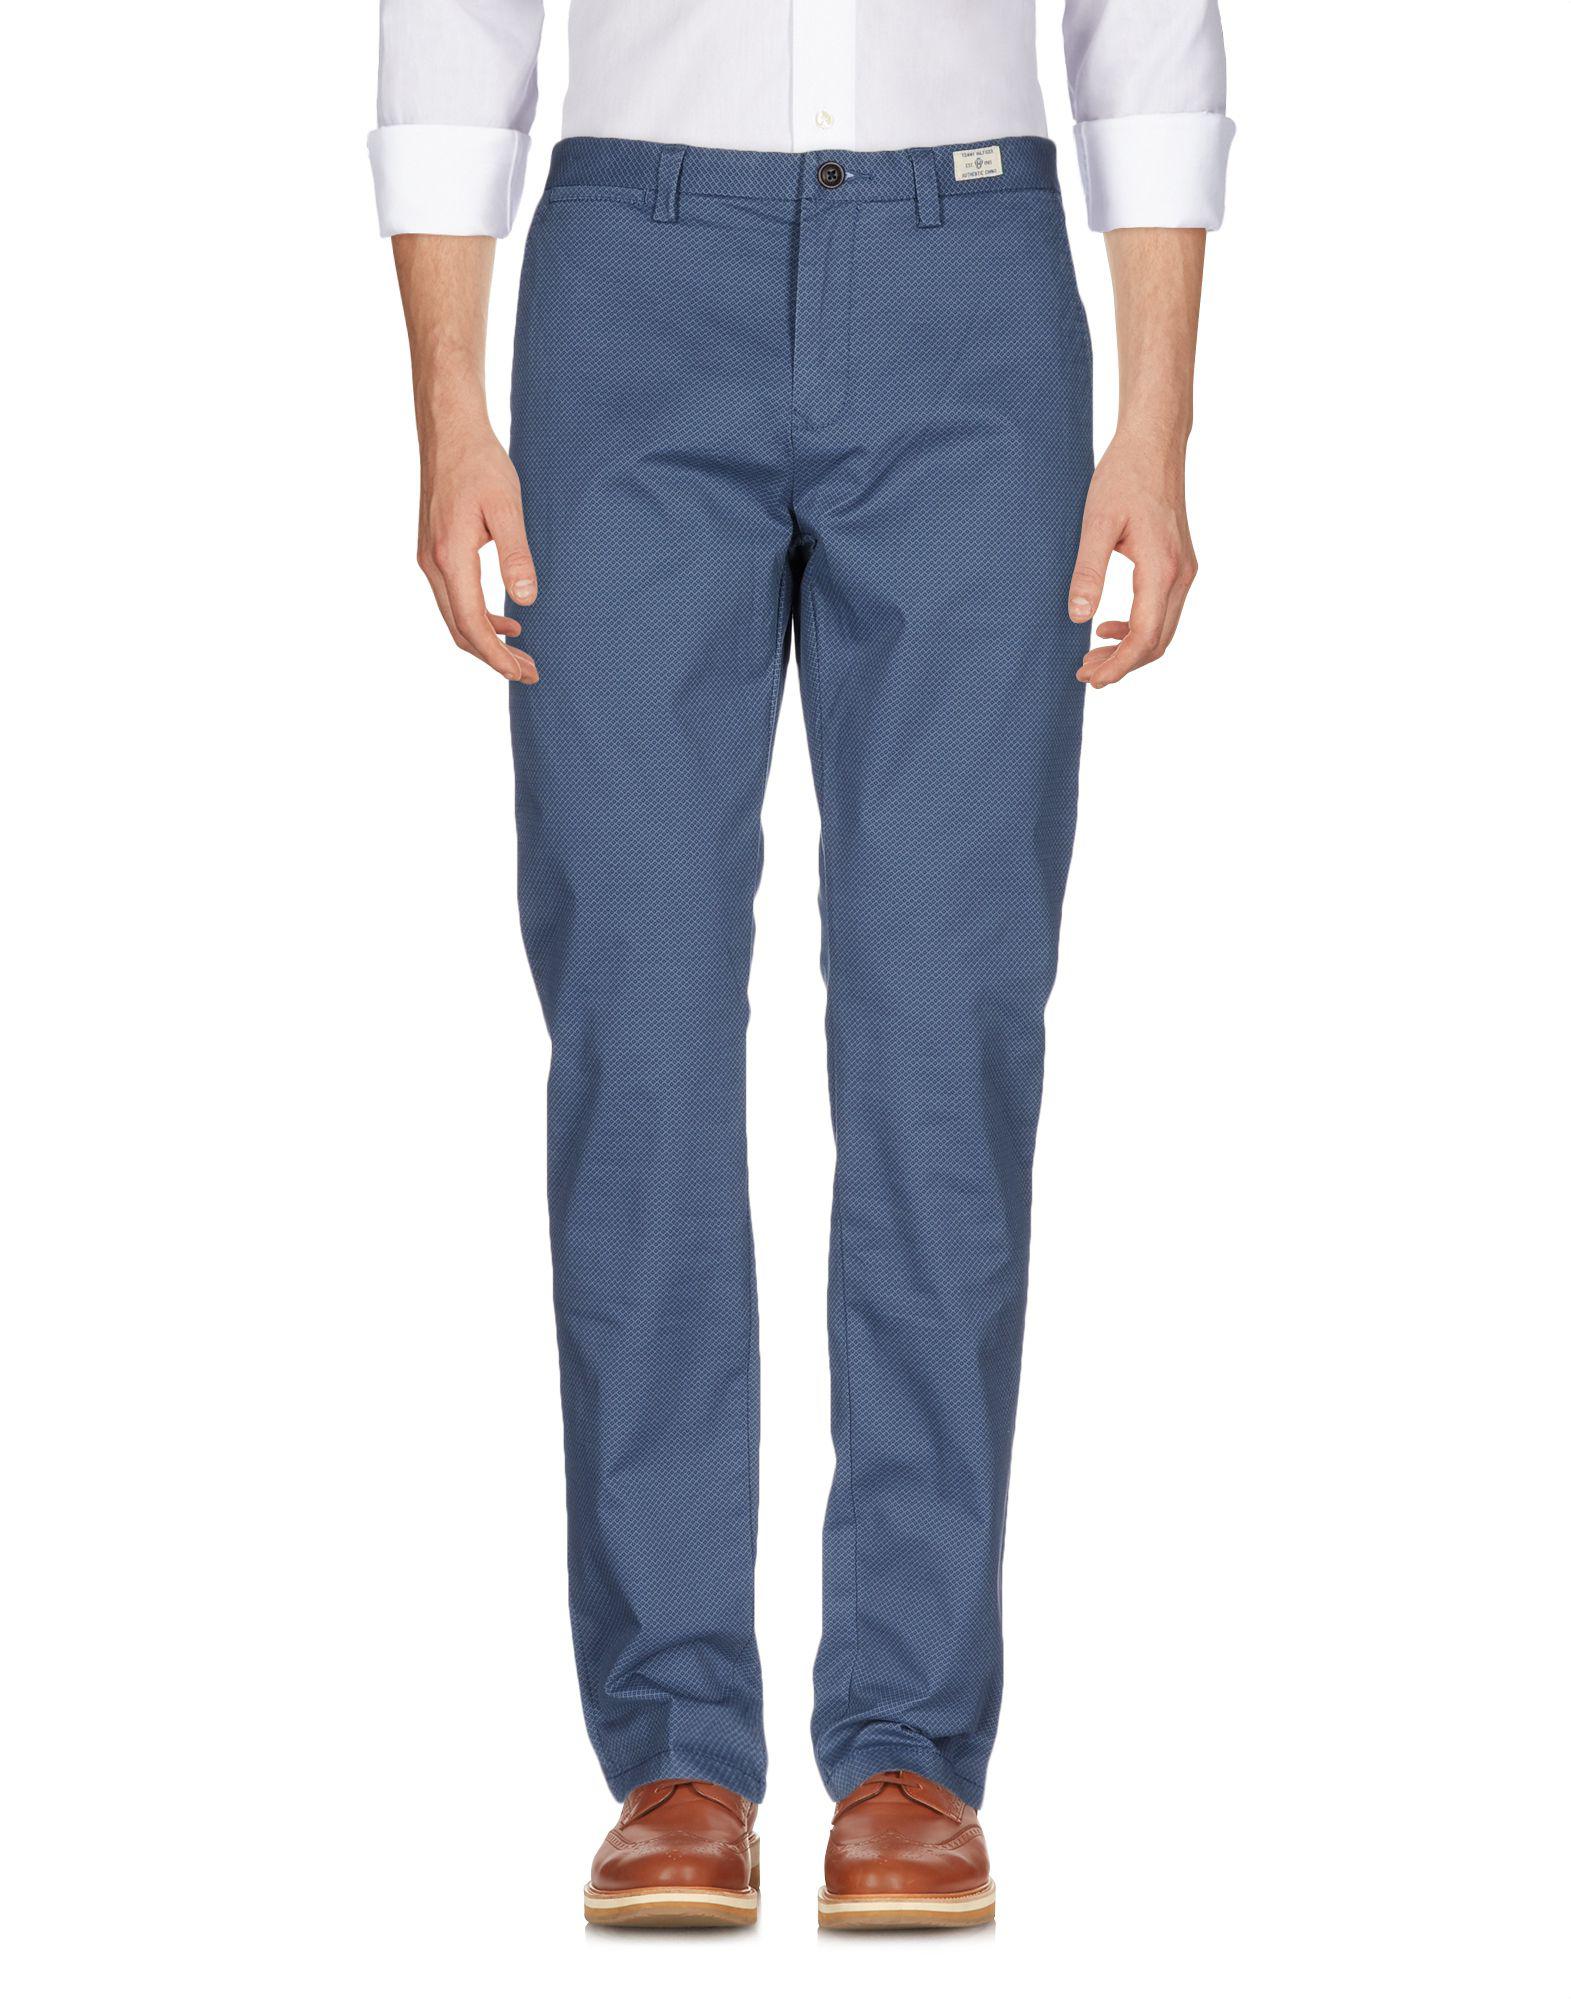 Tommy Hilfiger Cotton Casual Trouser in Slate Blue (Blue) for Men - Lyst